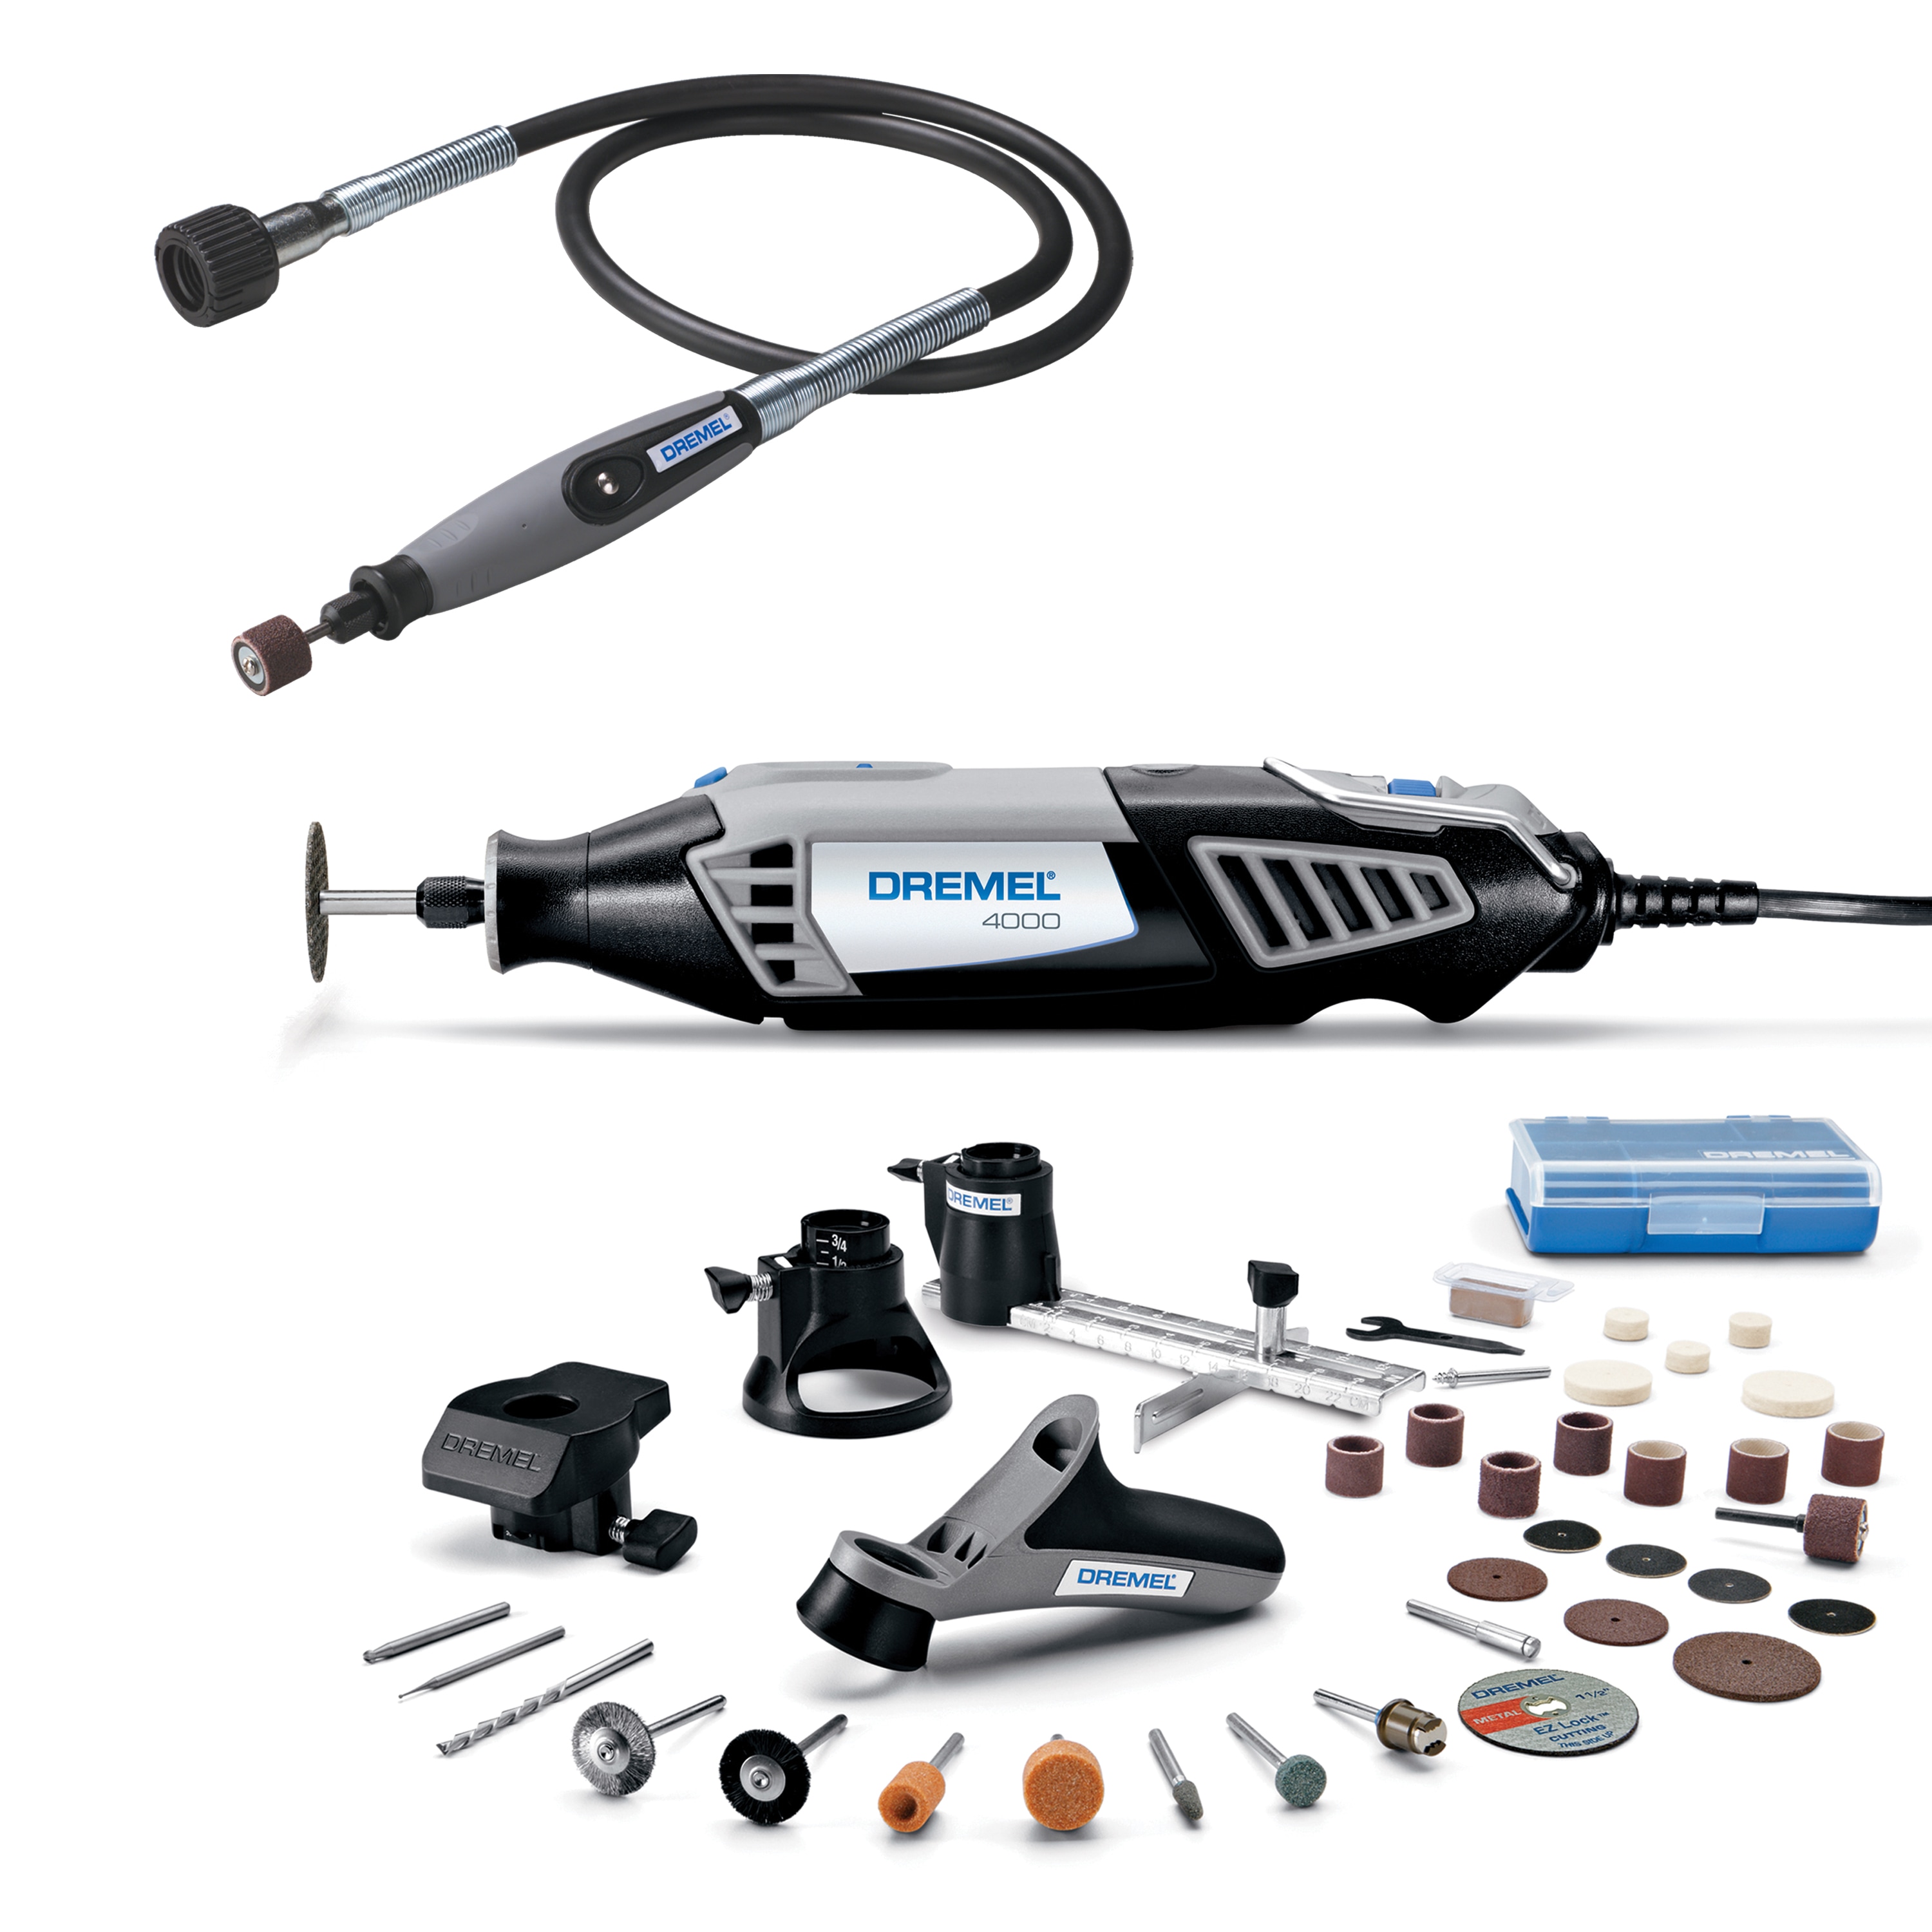 Shop 4000 Corded Variable Speed Rotary Tool with 4 Attachments and 34 + Flex Shaft Attachment at Lowes.com